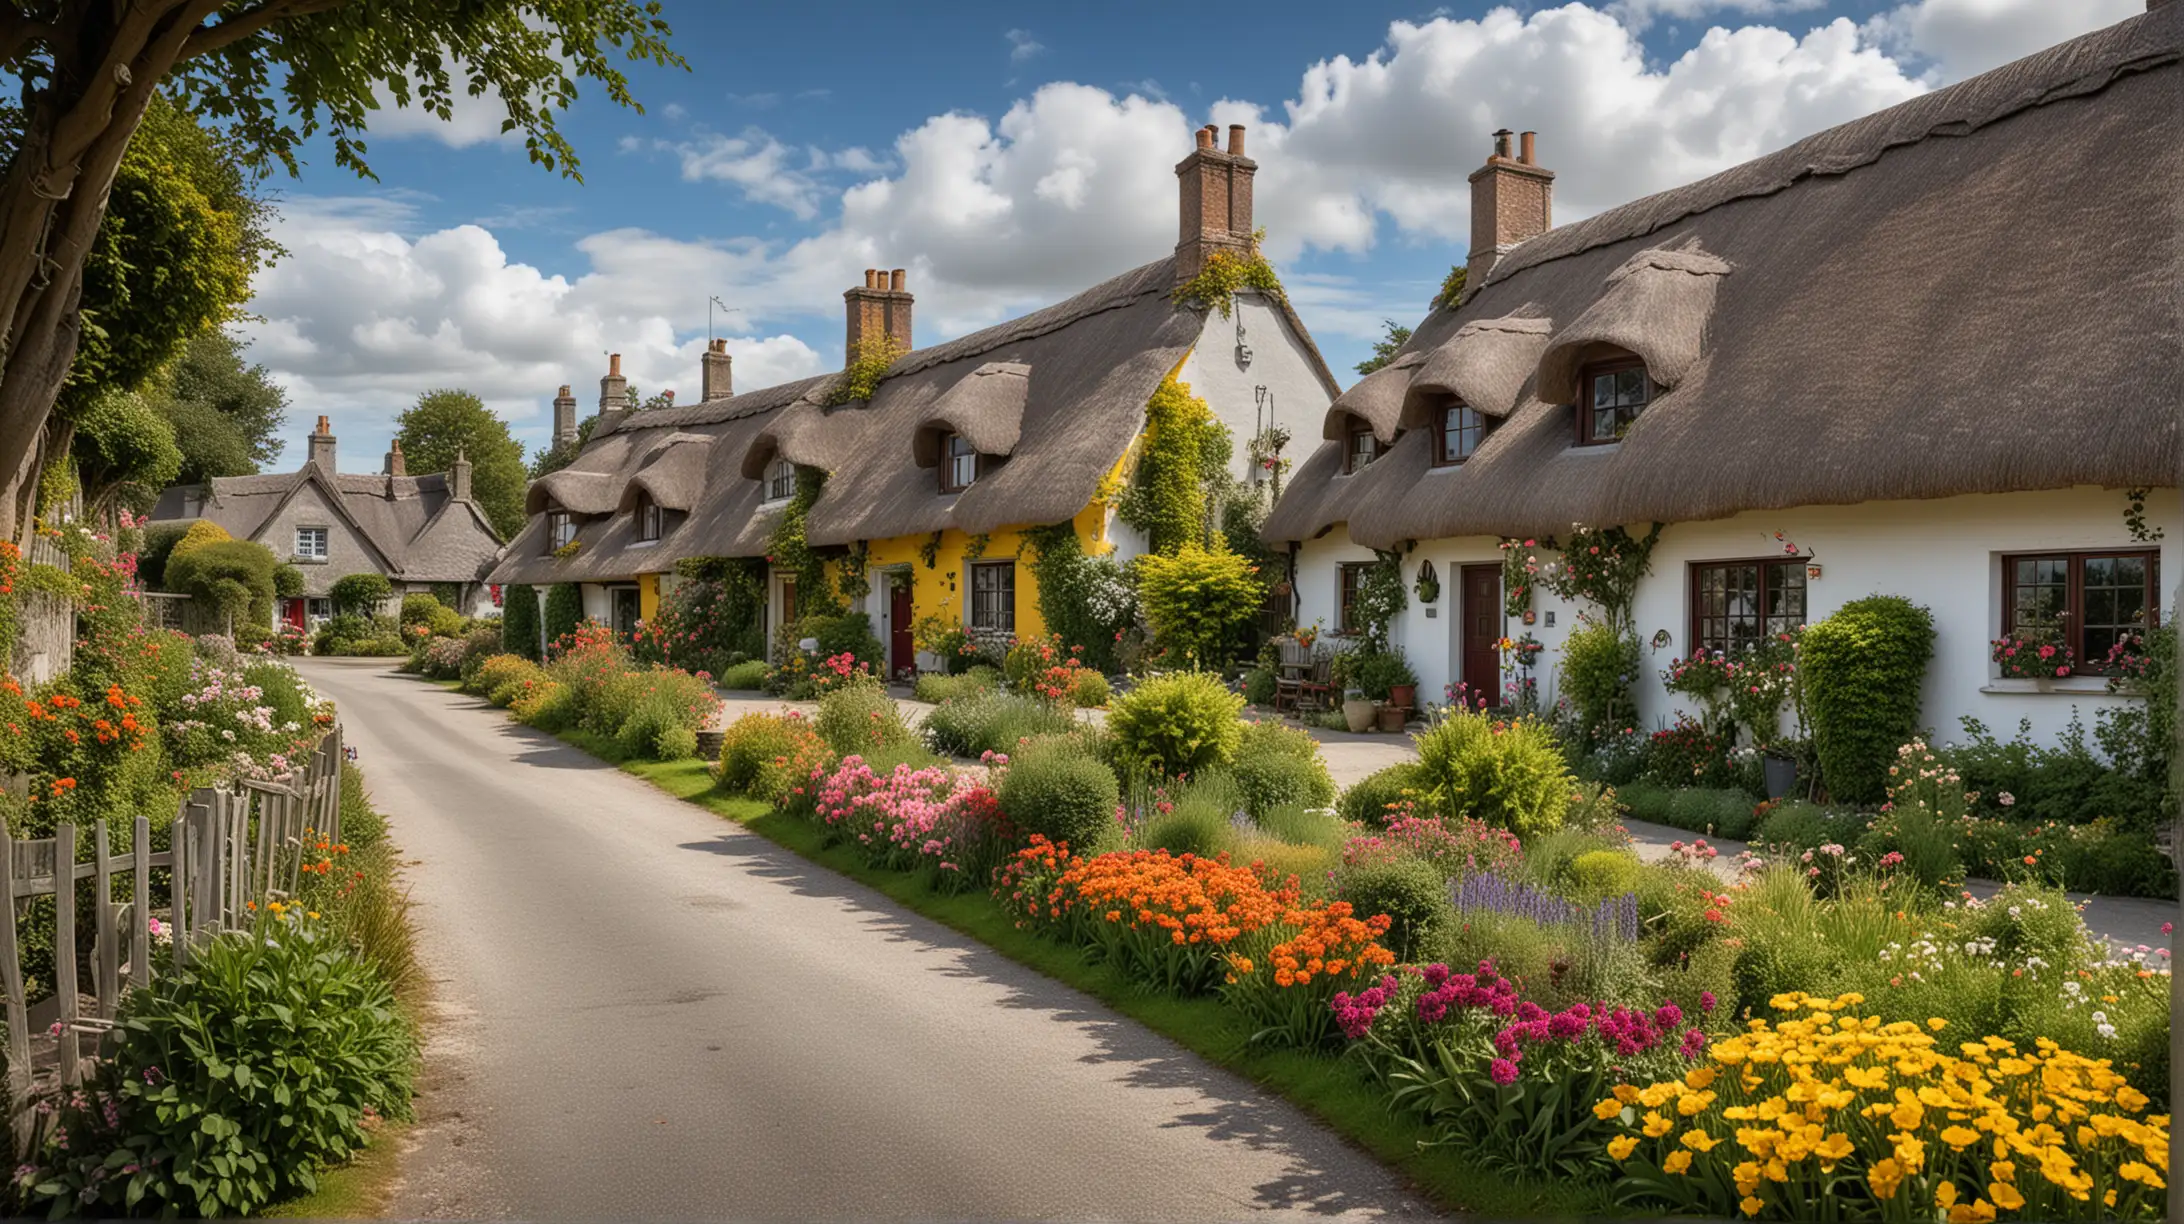 Scenic Adare Village with Thatched Cottages and Colorful Gardens Captured by Canon EOS R8